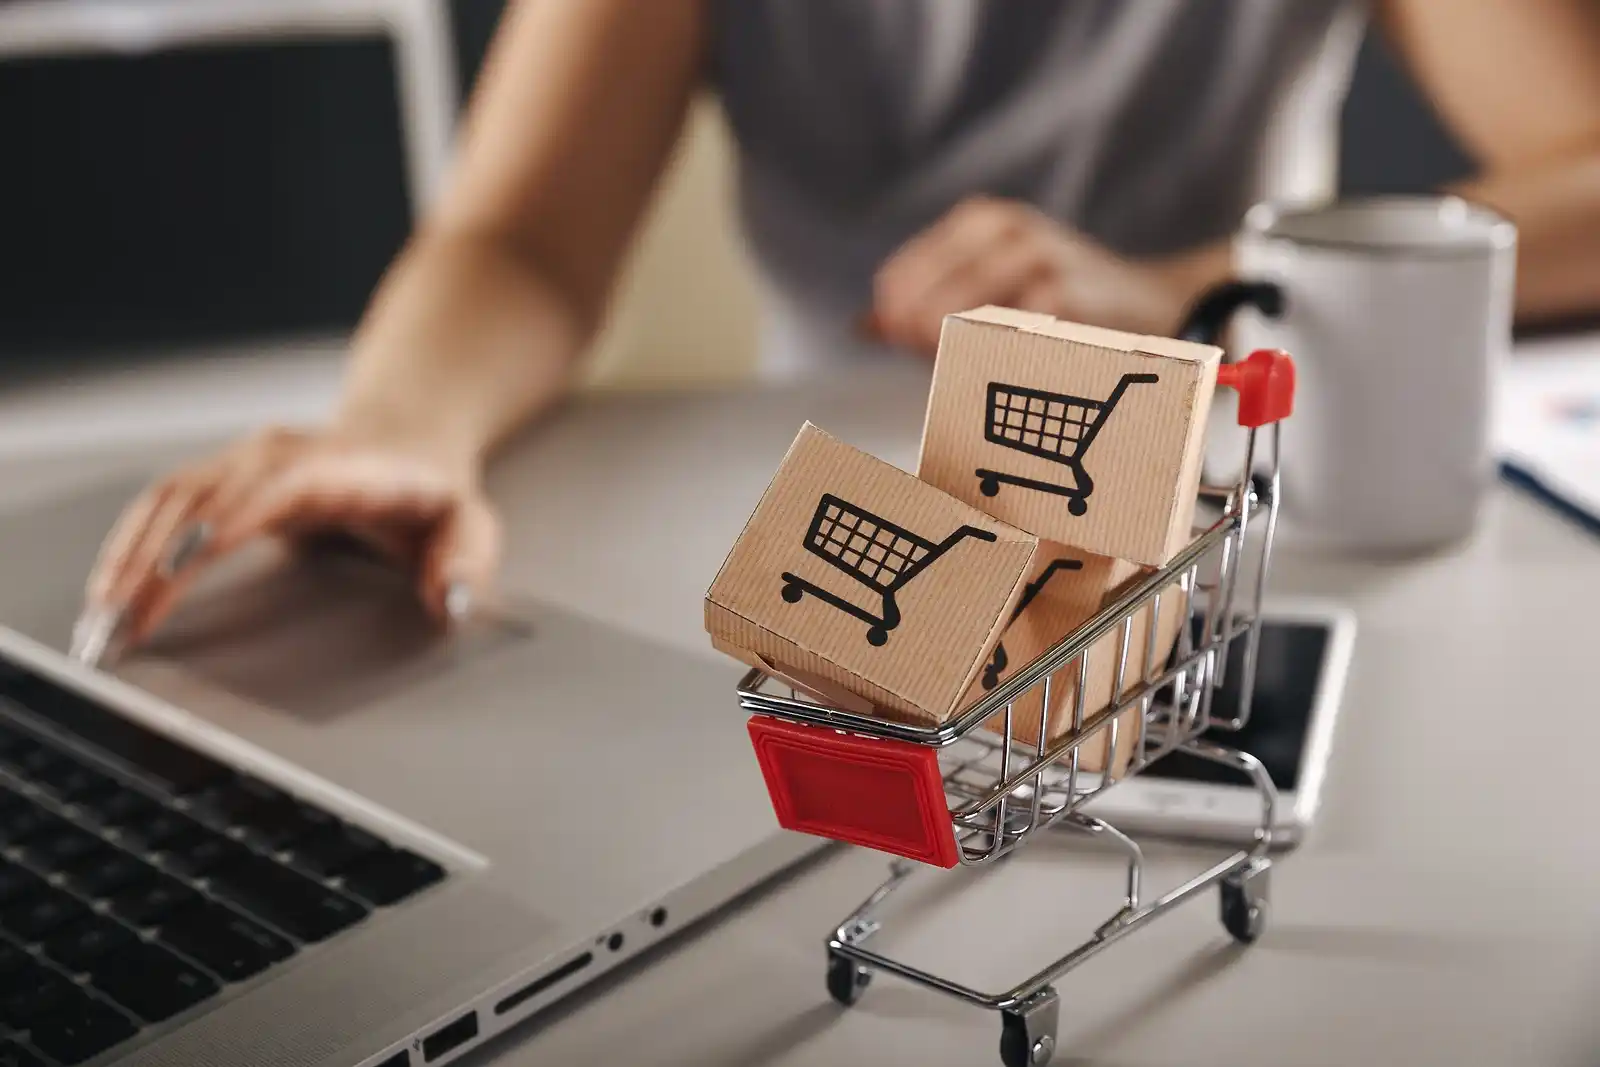 E-commerce And Online Retail Business in Europe